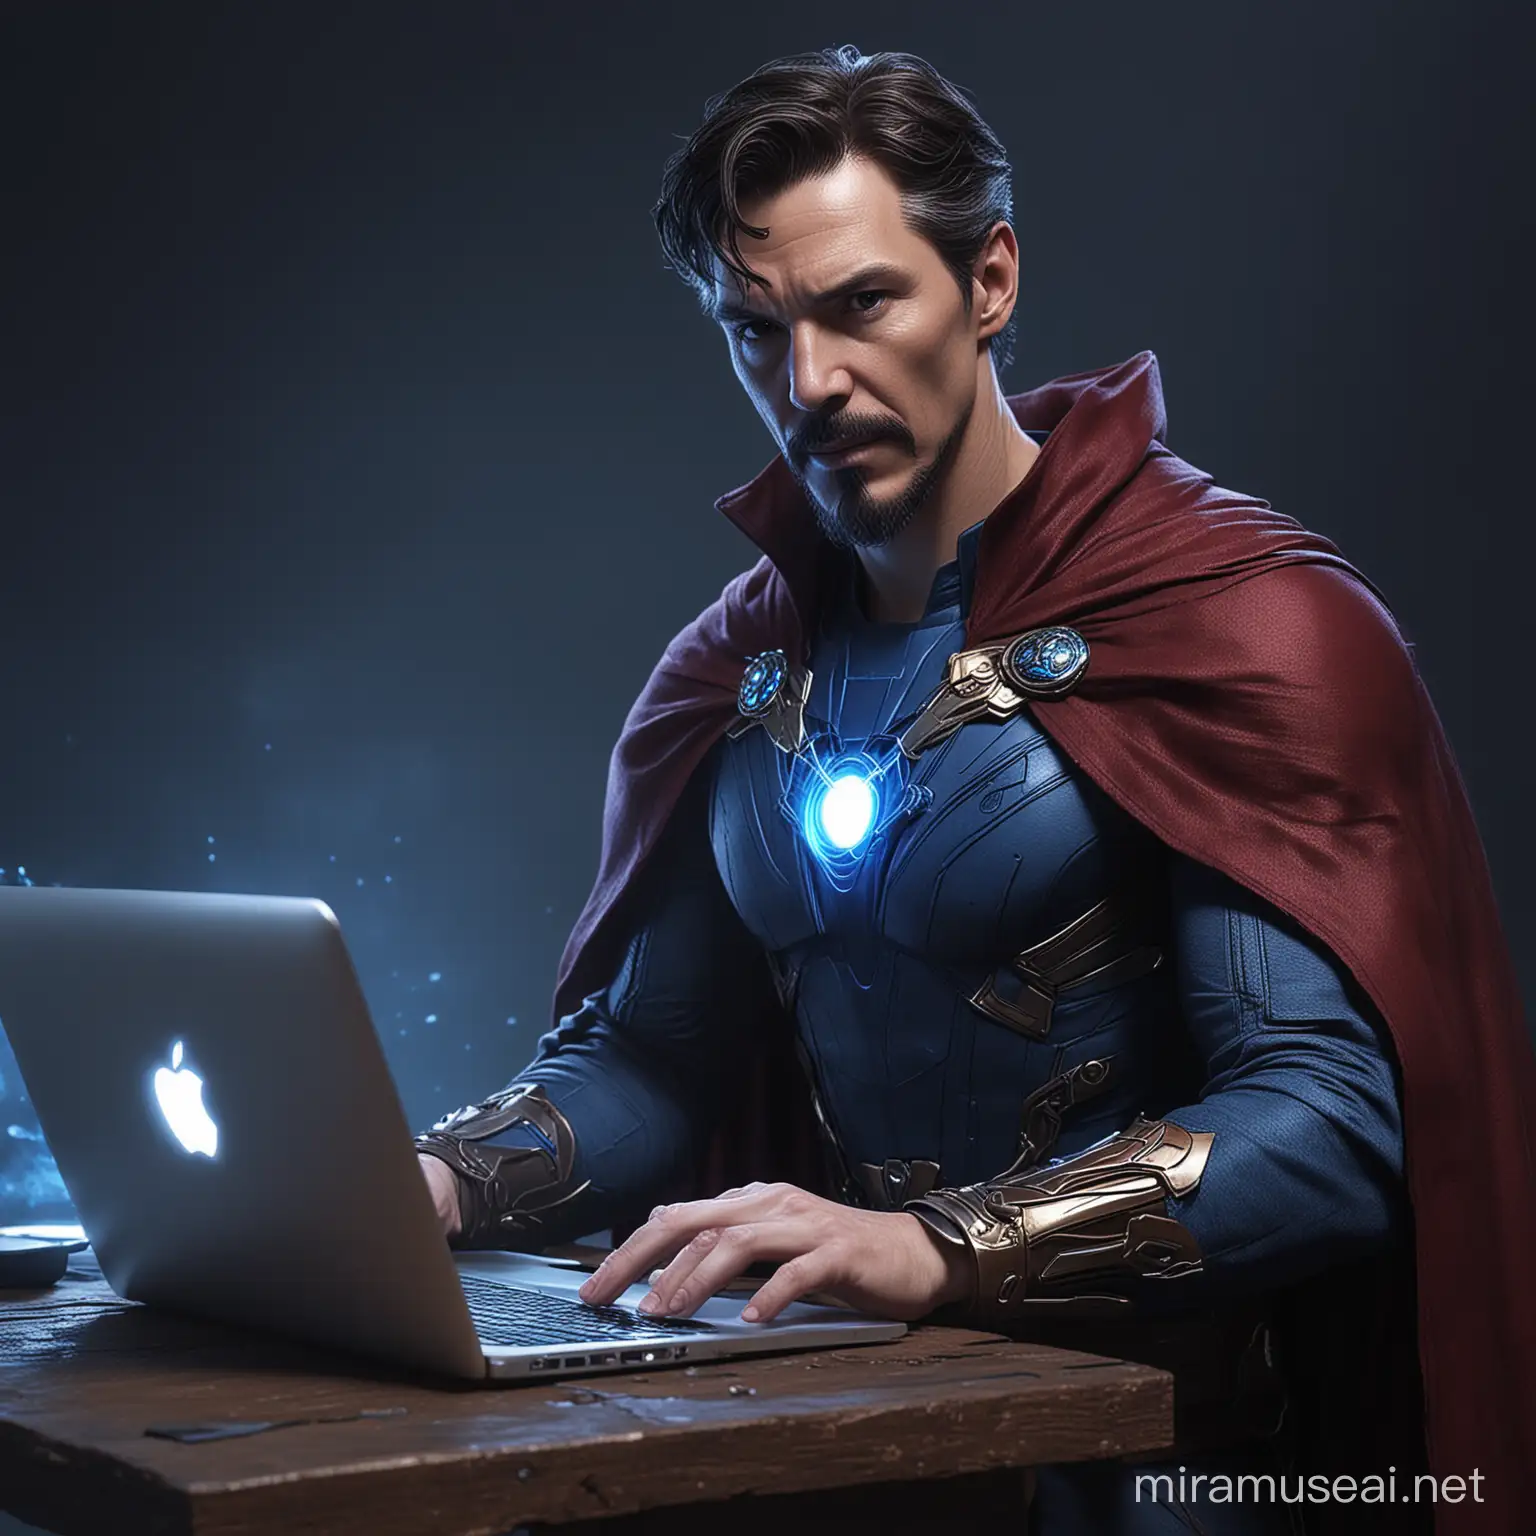 realistic mystic man in a cape with a macbook. Blue lighting. dr strange and iron man mix